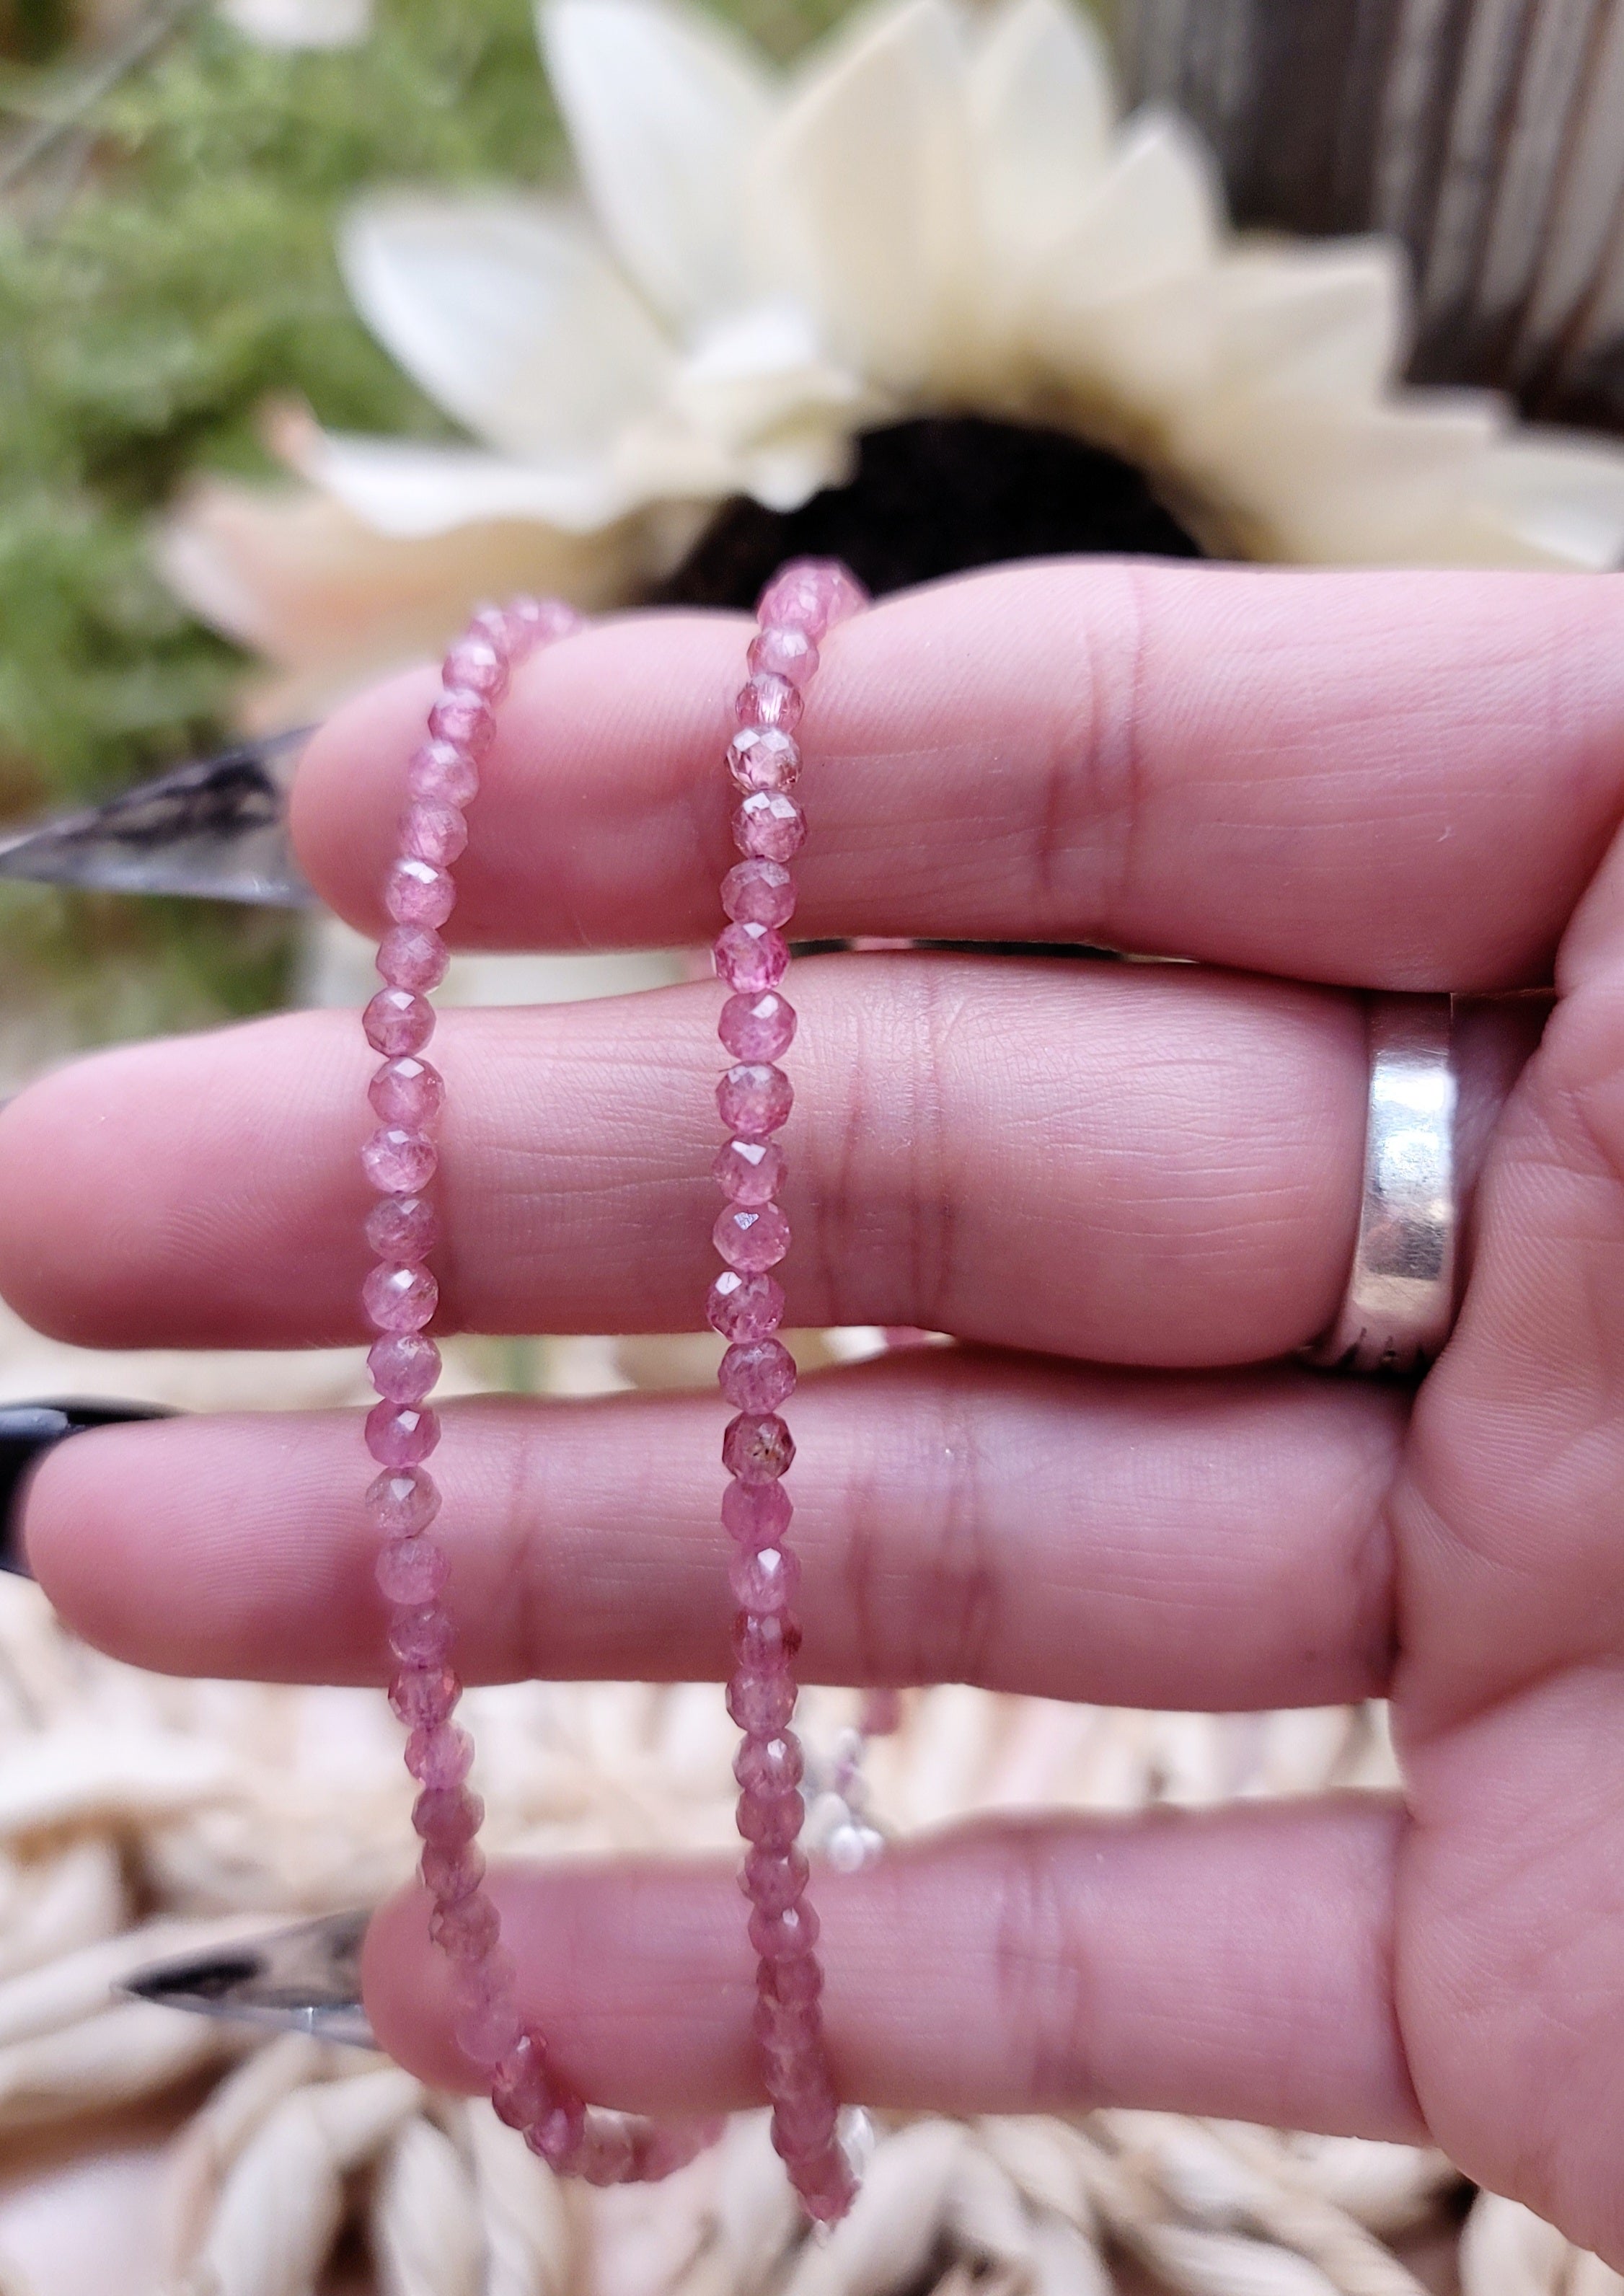 Pink Tourmaline Faceted Bracelet With Magnetic Clasps for Compassion, Joy, Opening Heart to Love & Wisdom